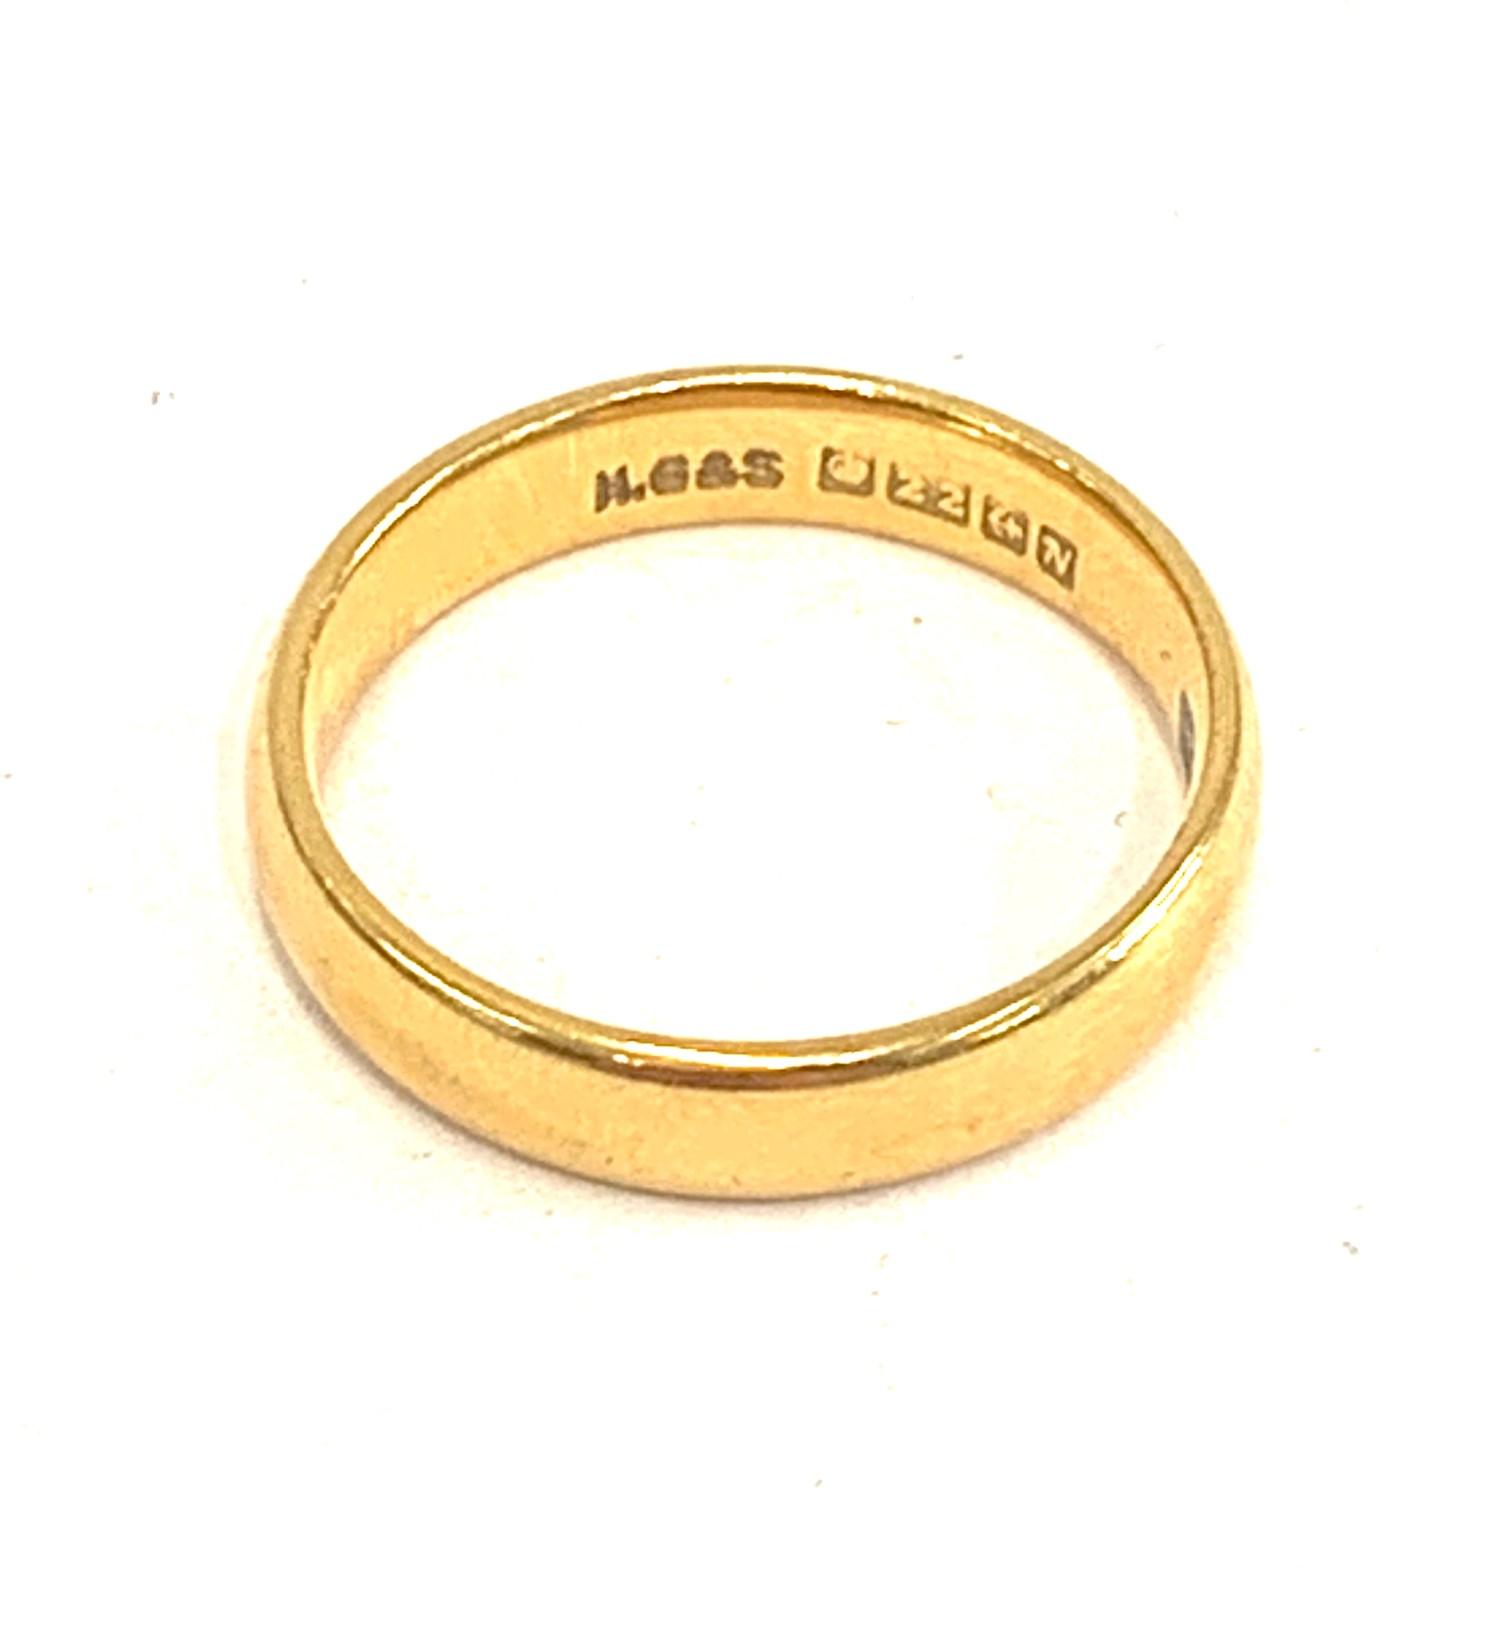 22ct Yellow gold plain fidelity band, approximate weight 3.6g